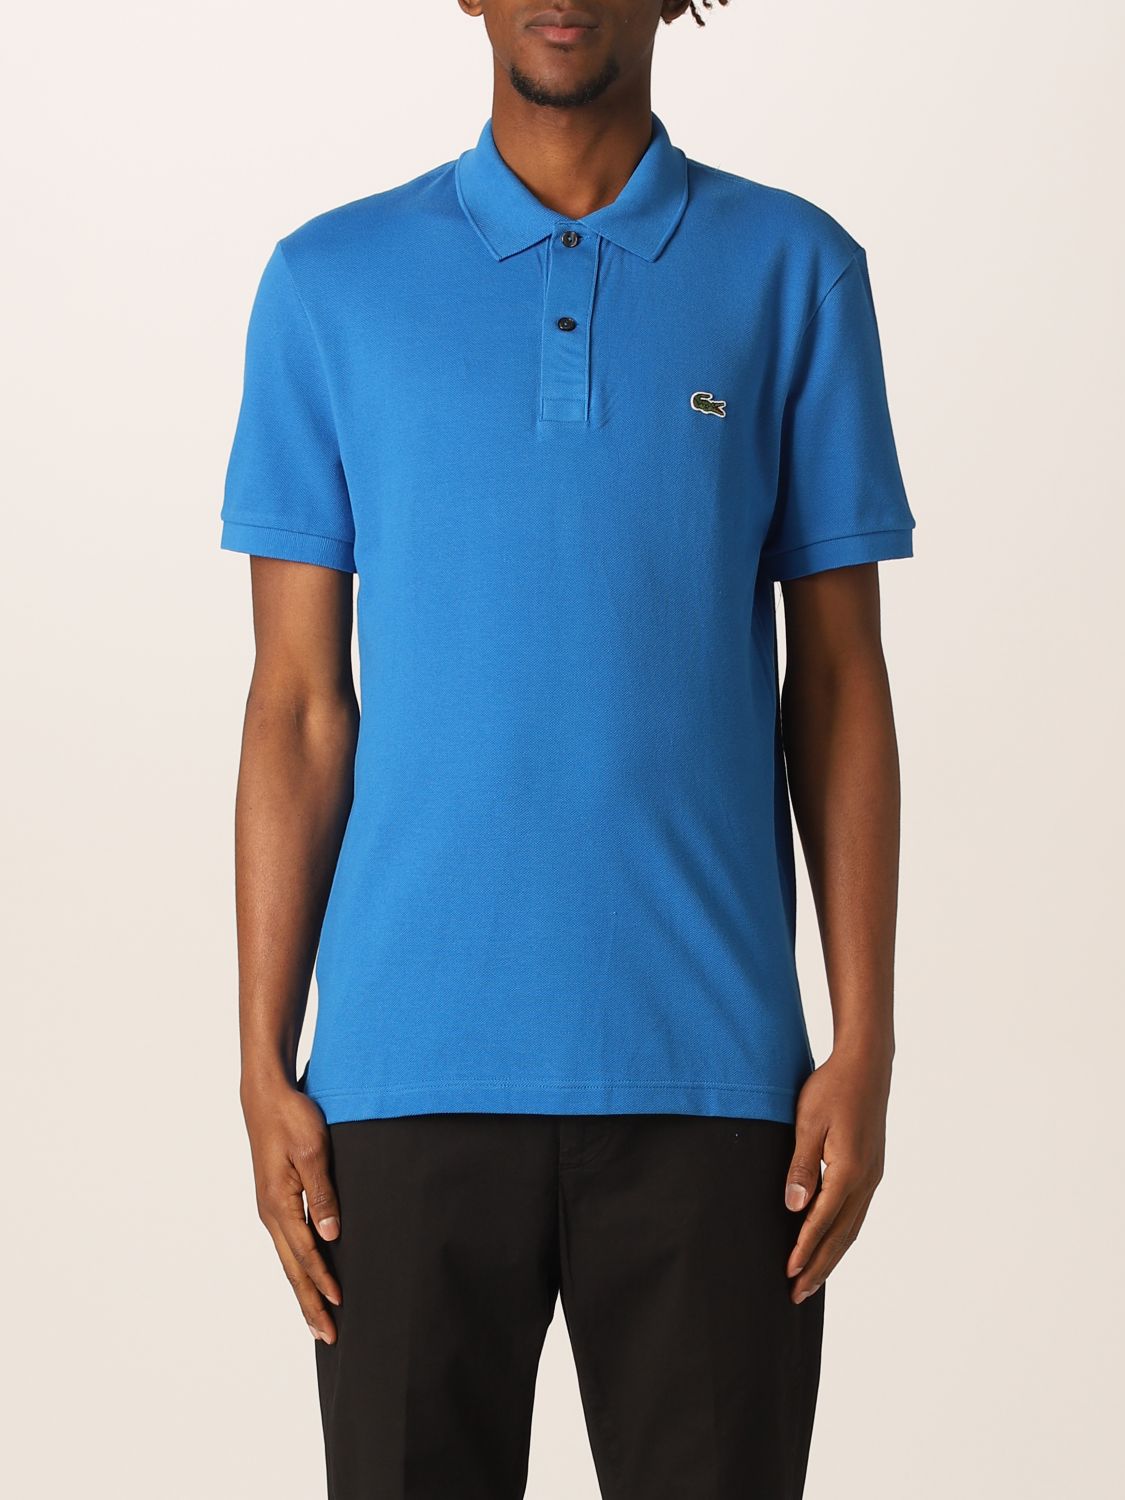 Lacoste Outlet: basic polo shirt with logo - Blue 2 | Lacoste polo ...